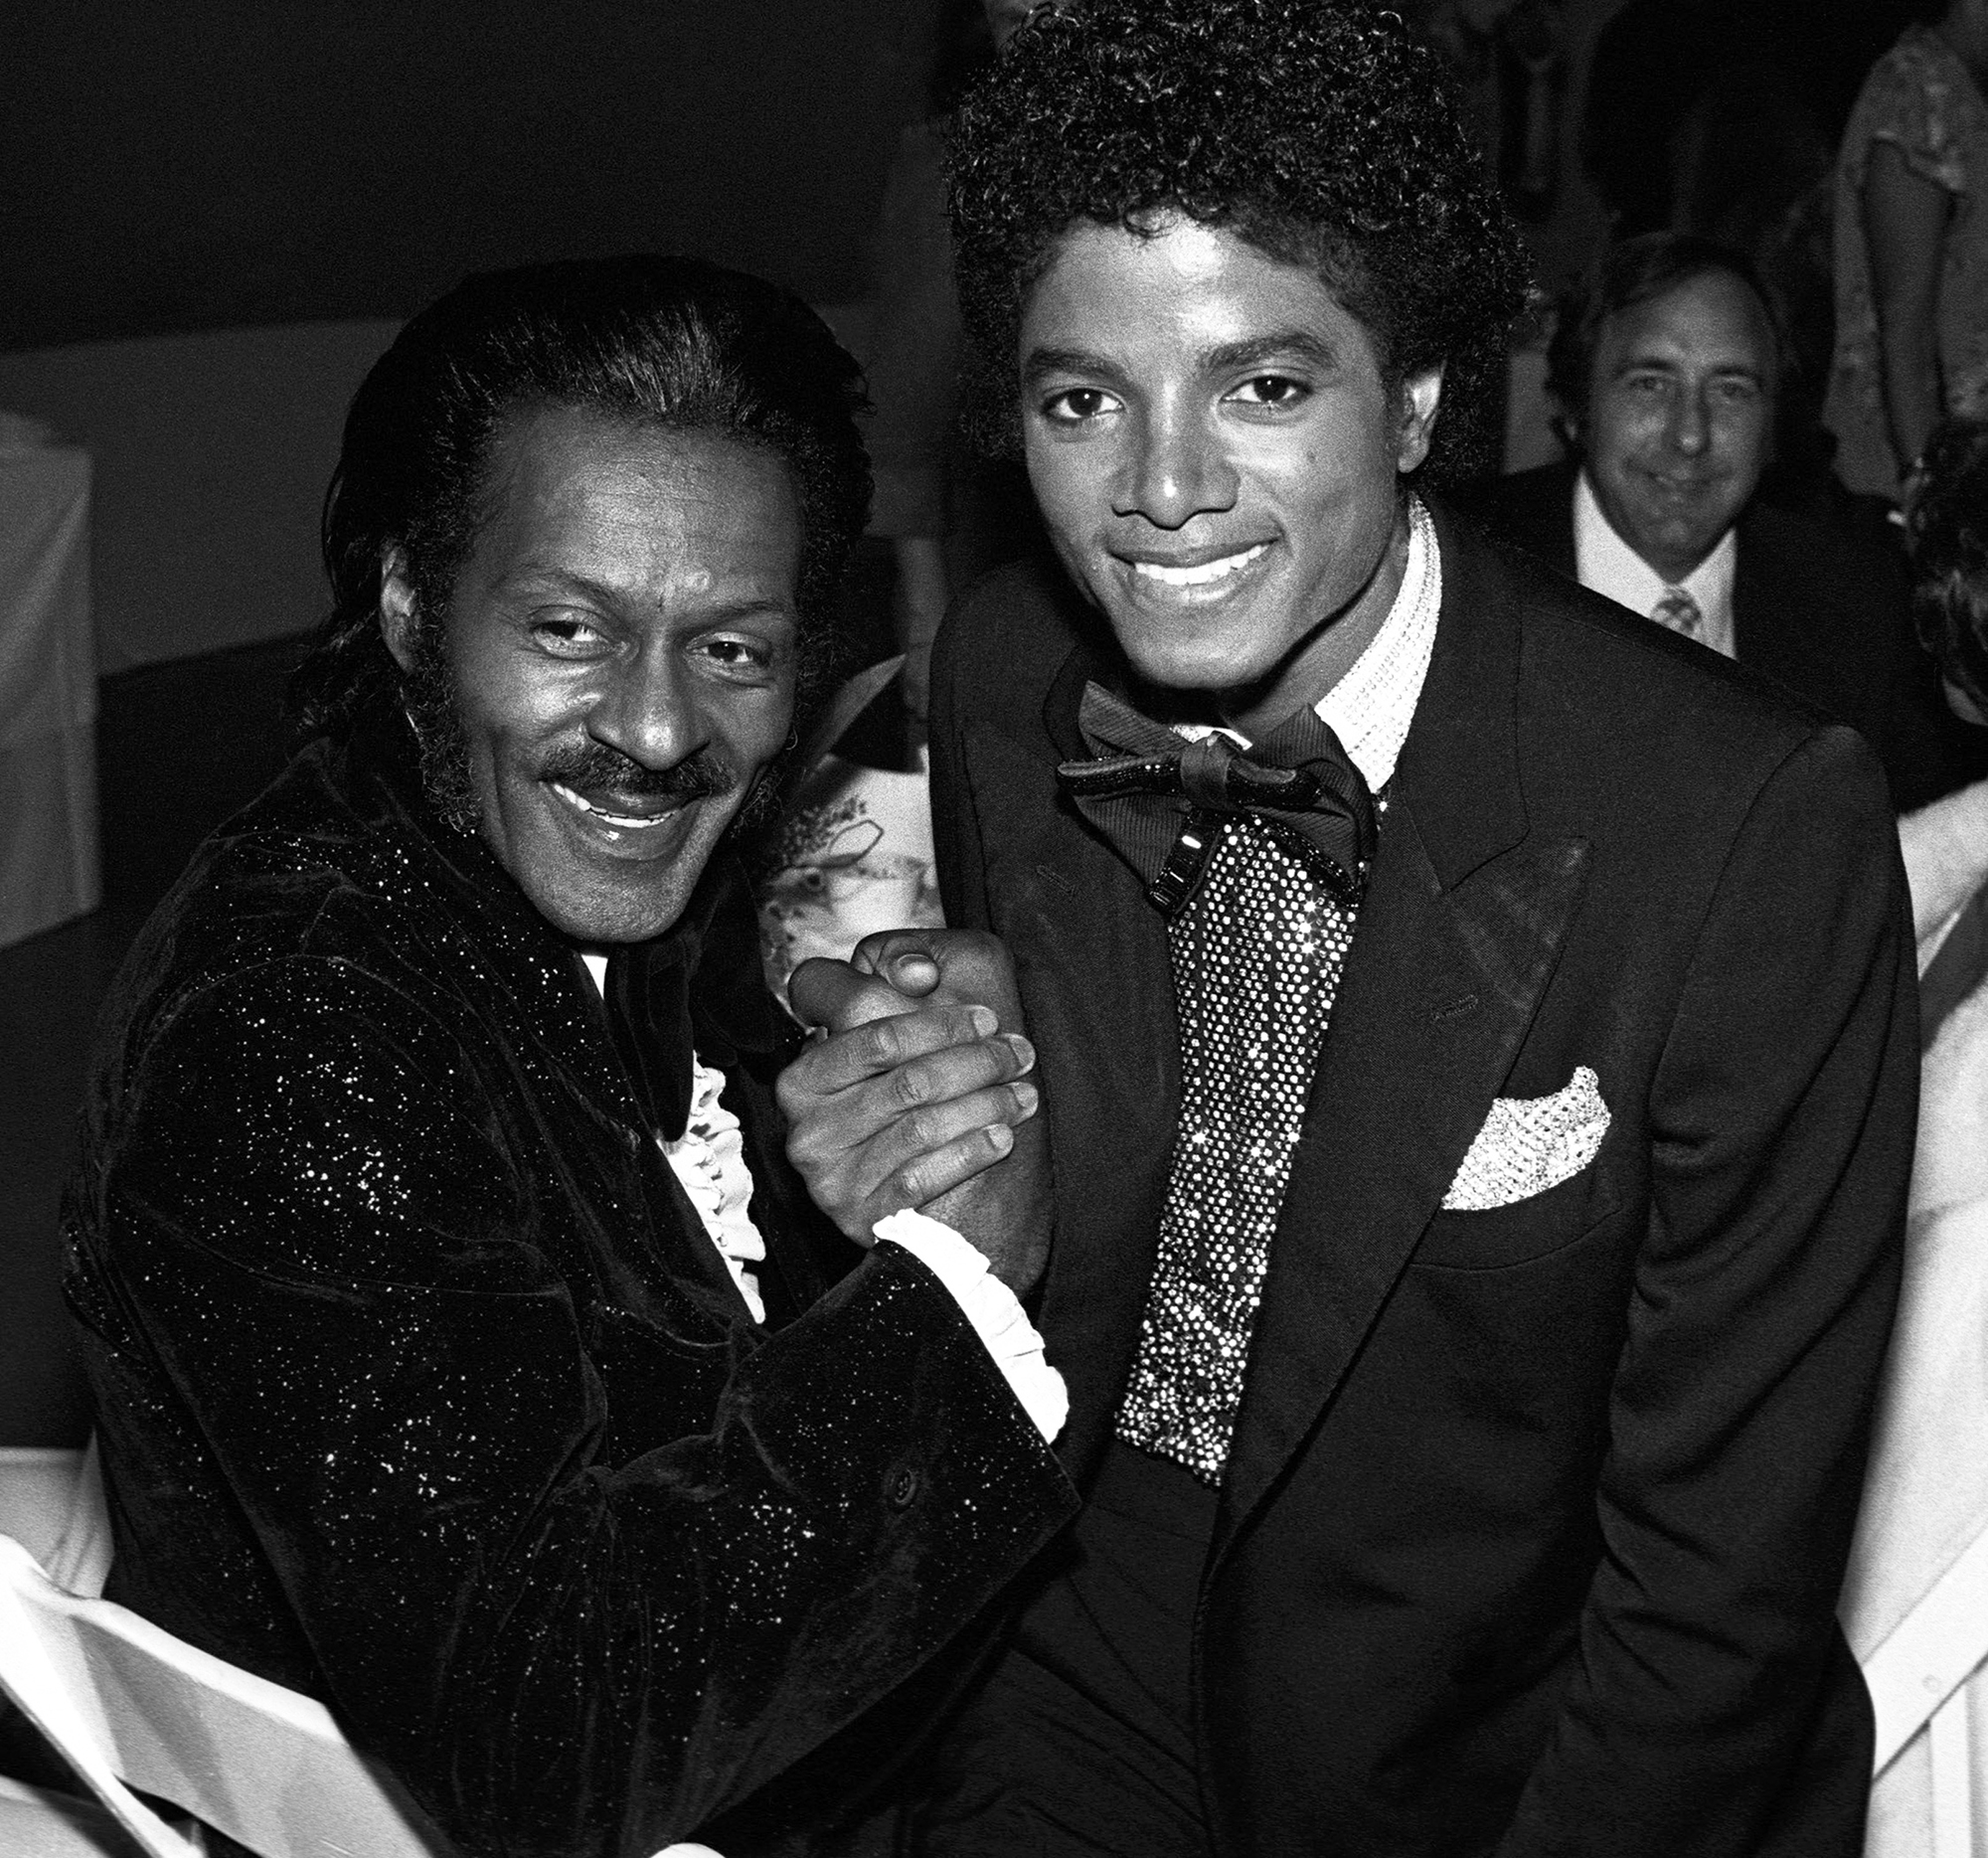 Chuck Berry and Michael Jackson at a Grammy Awards reception in Los Angeles in 1978.